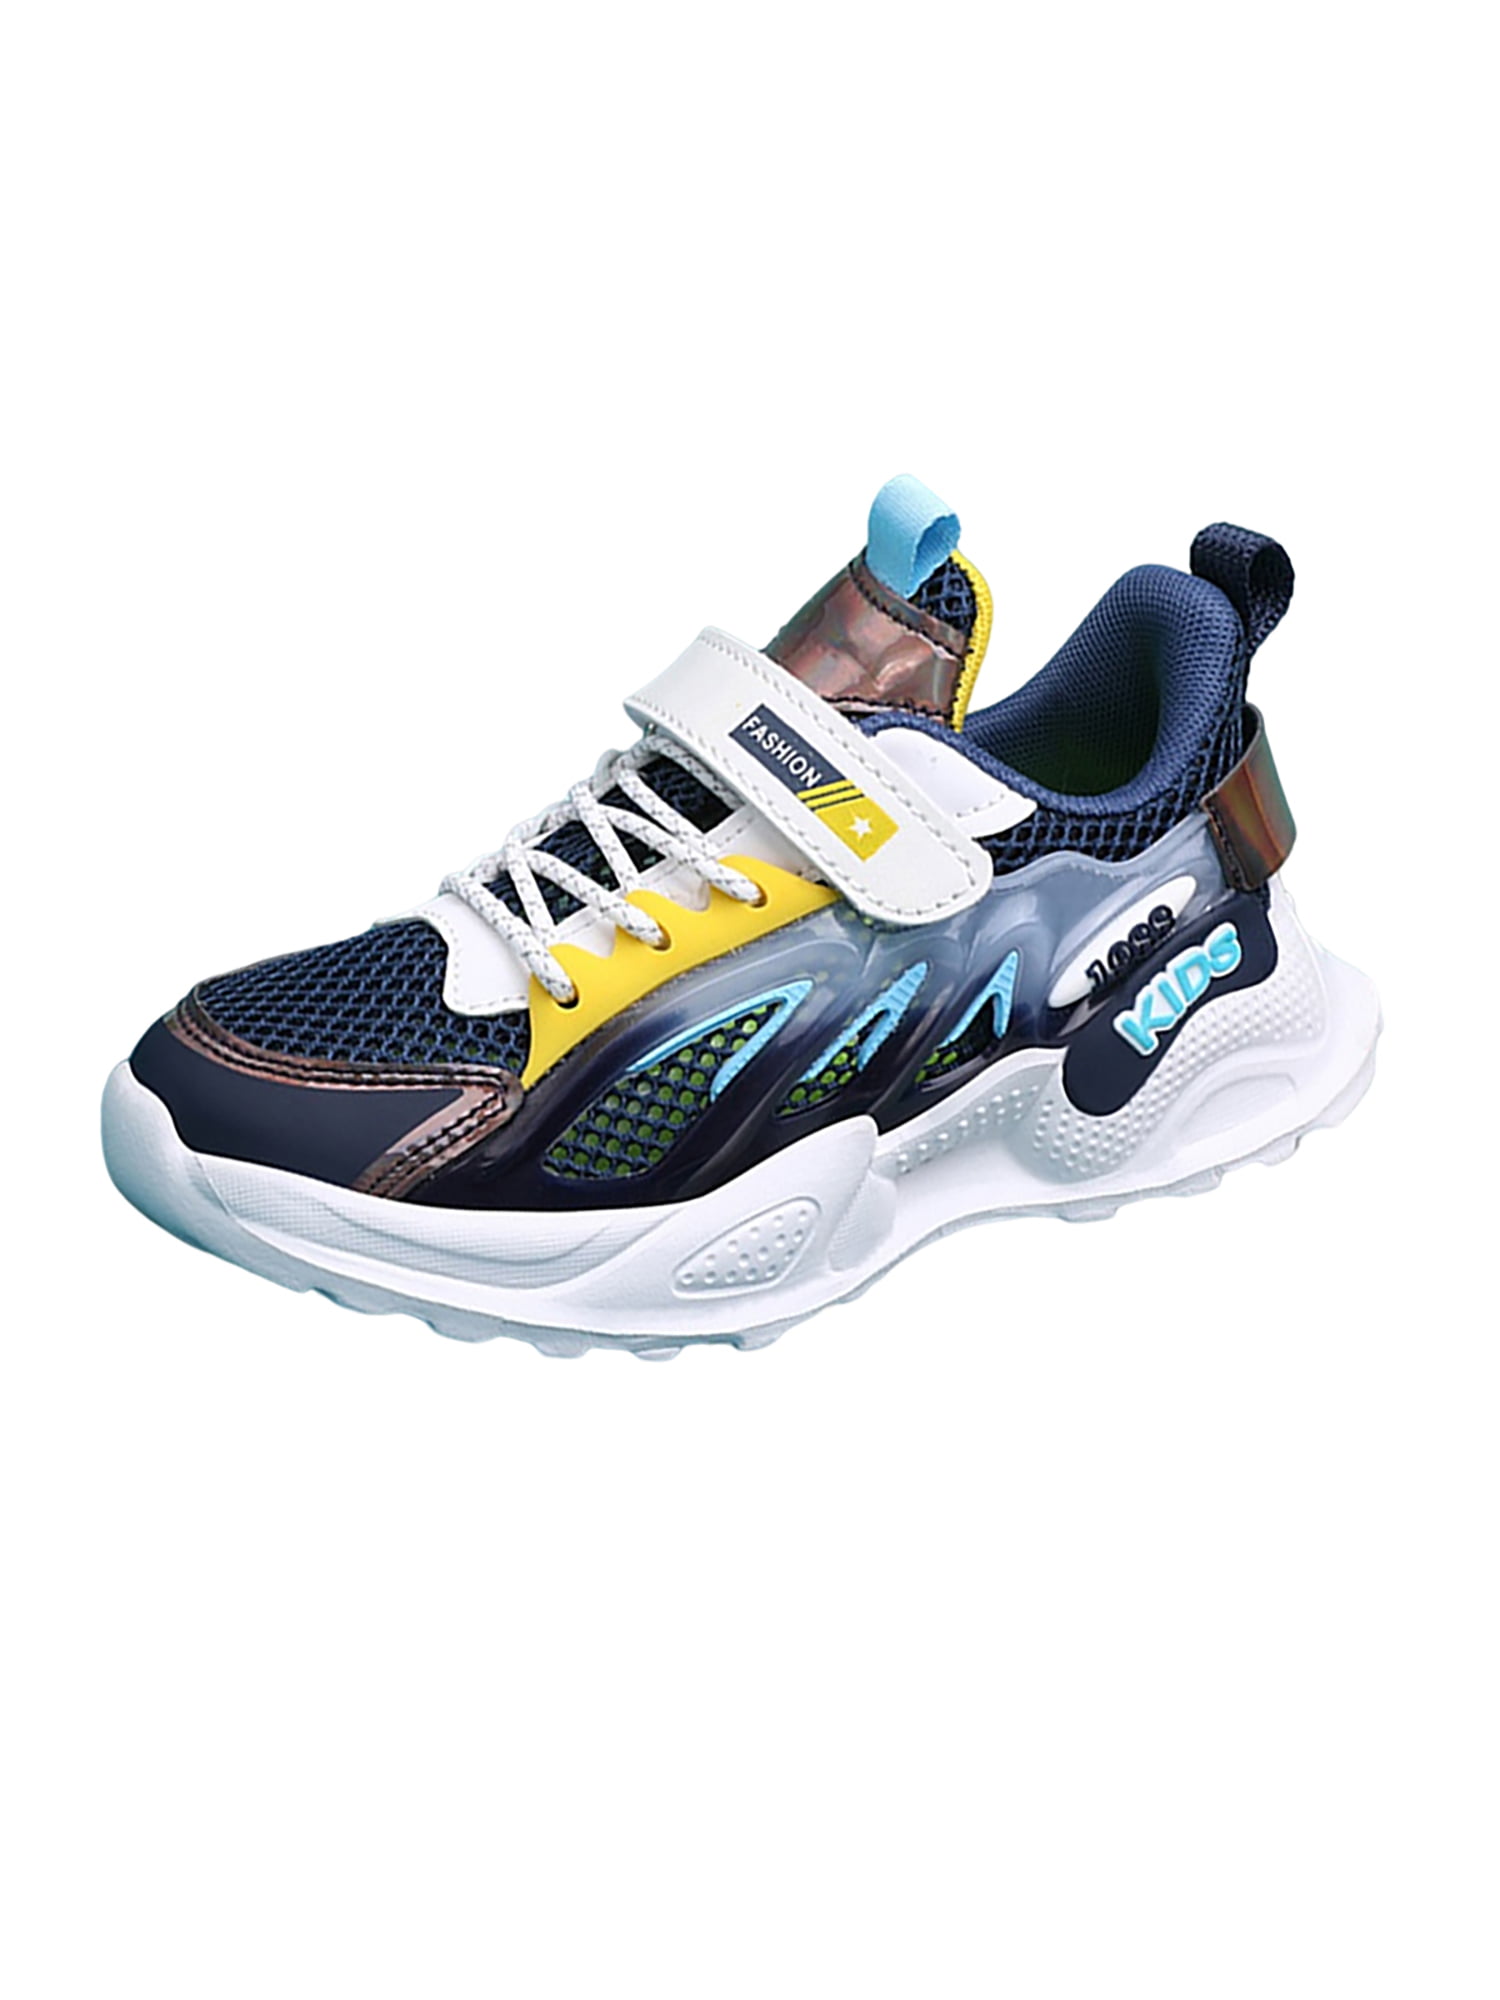 Details about   Kids Boys Outdoor Running Shoes Athletic Walking Comfortable Casual Sneakers Jog 